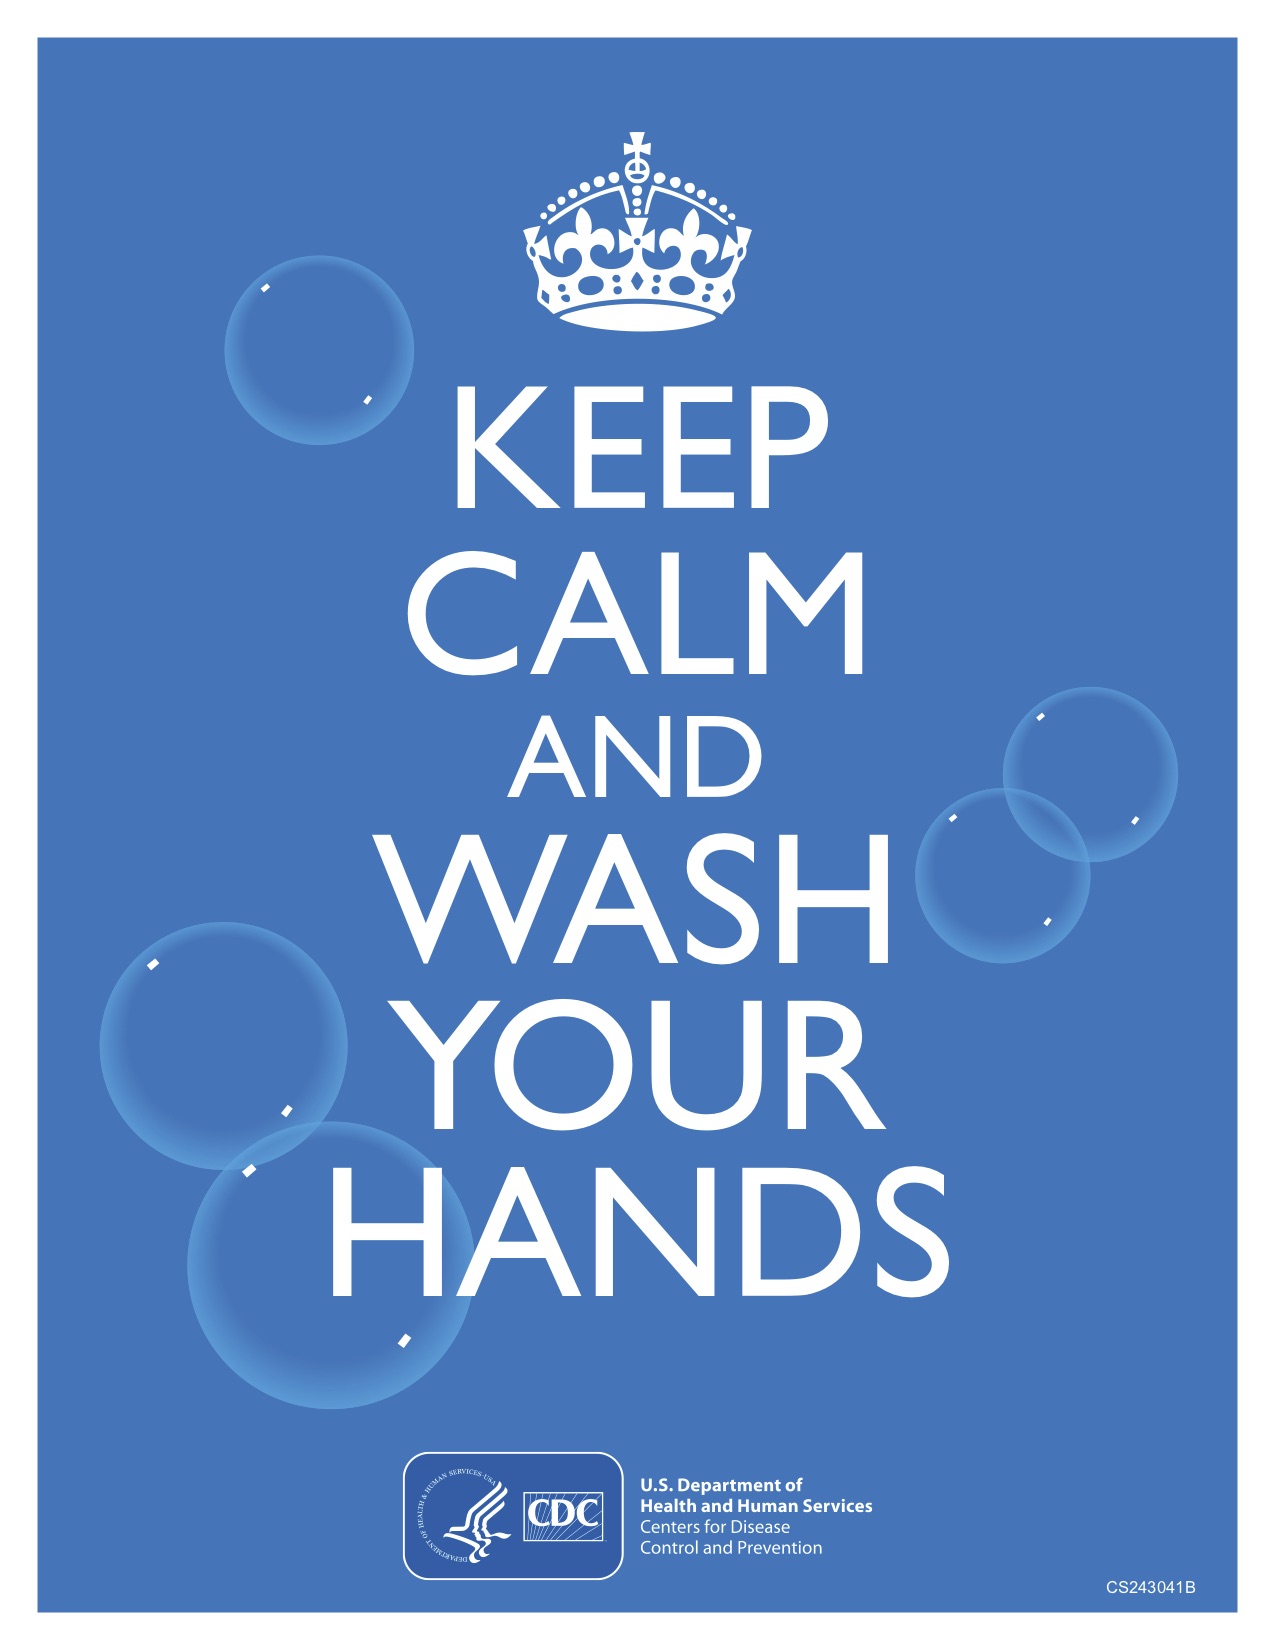 Keep Calm and Wash Your Hands poster